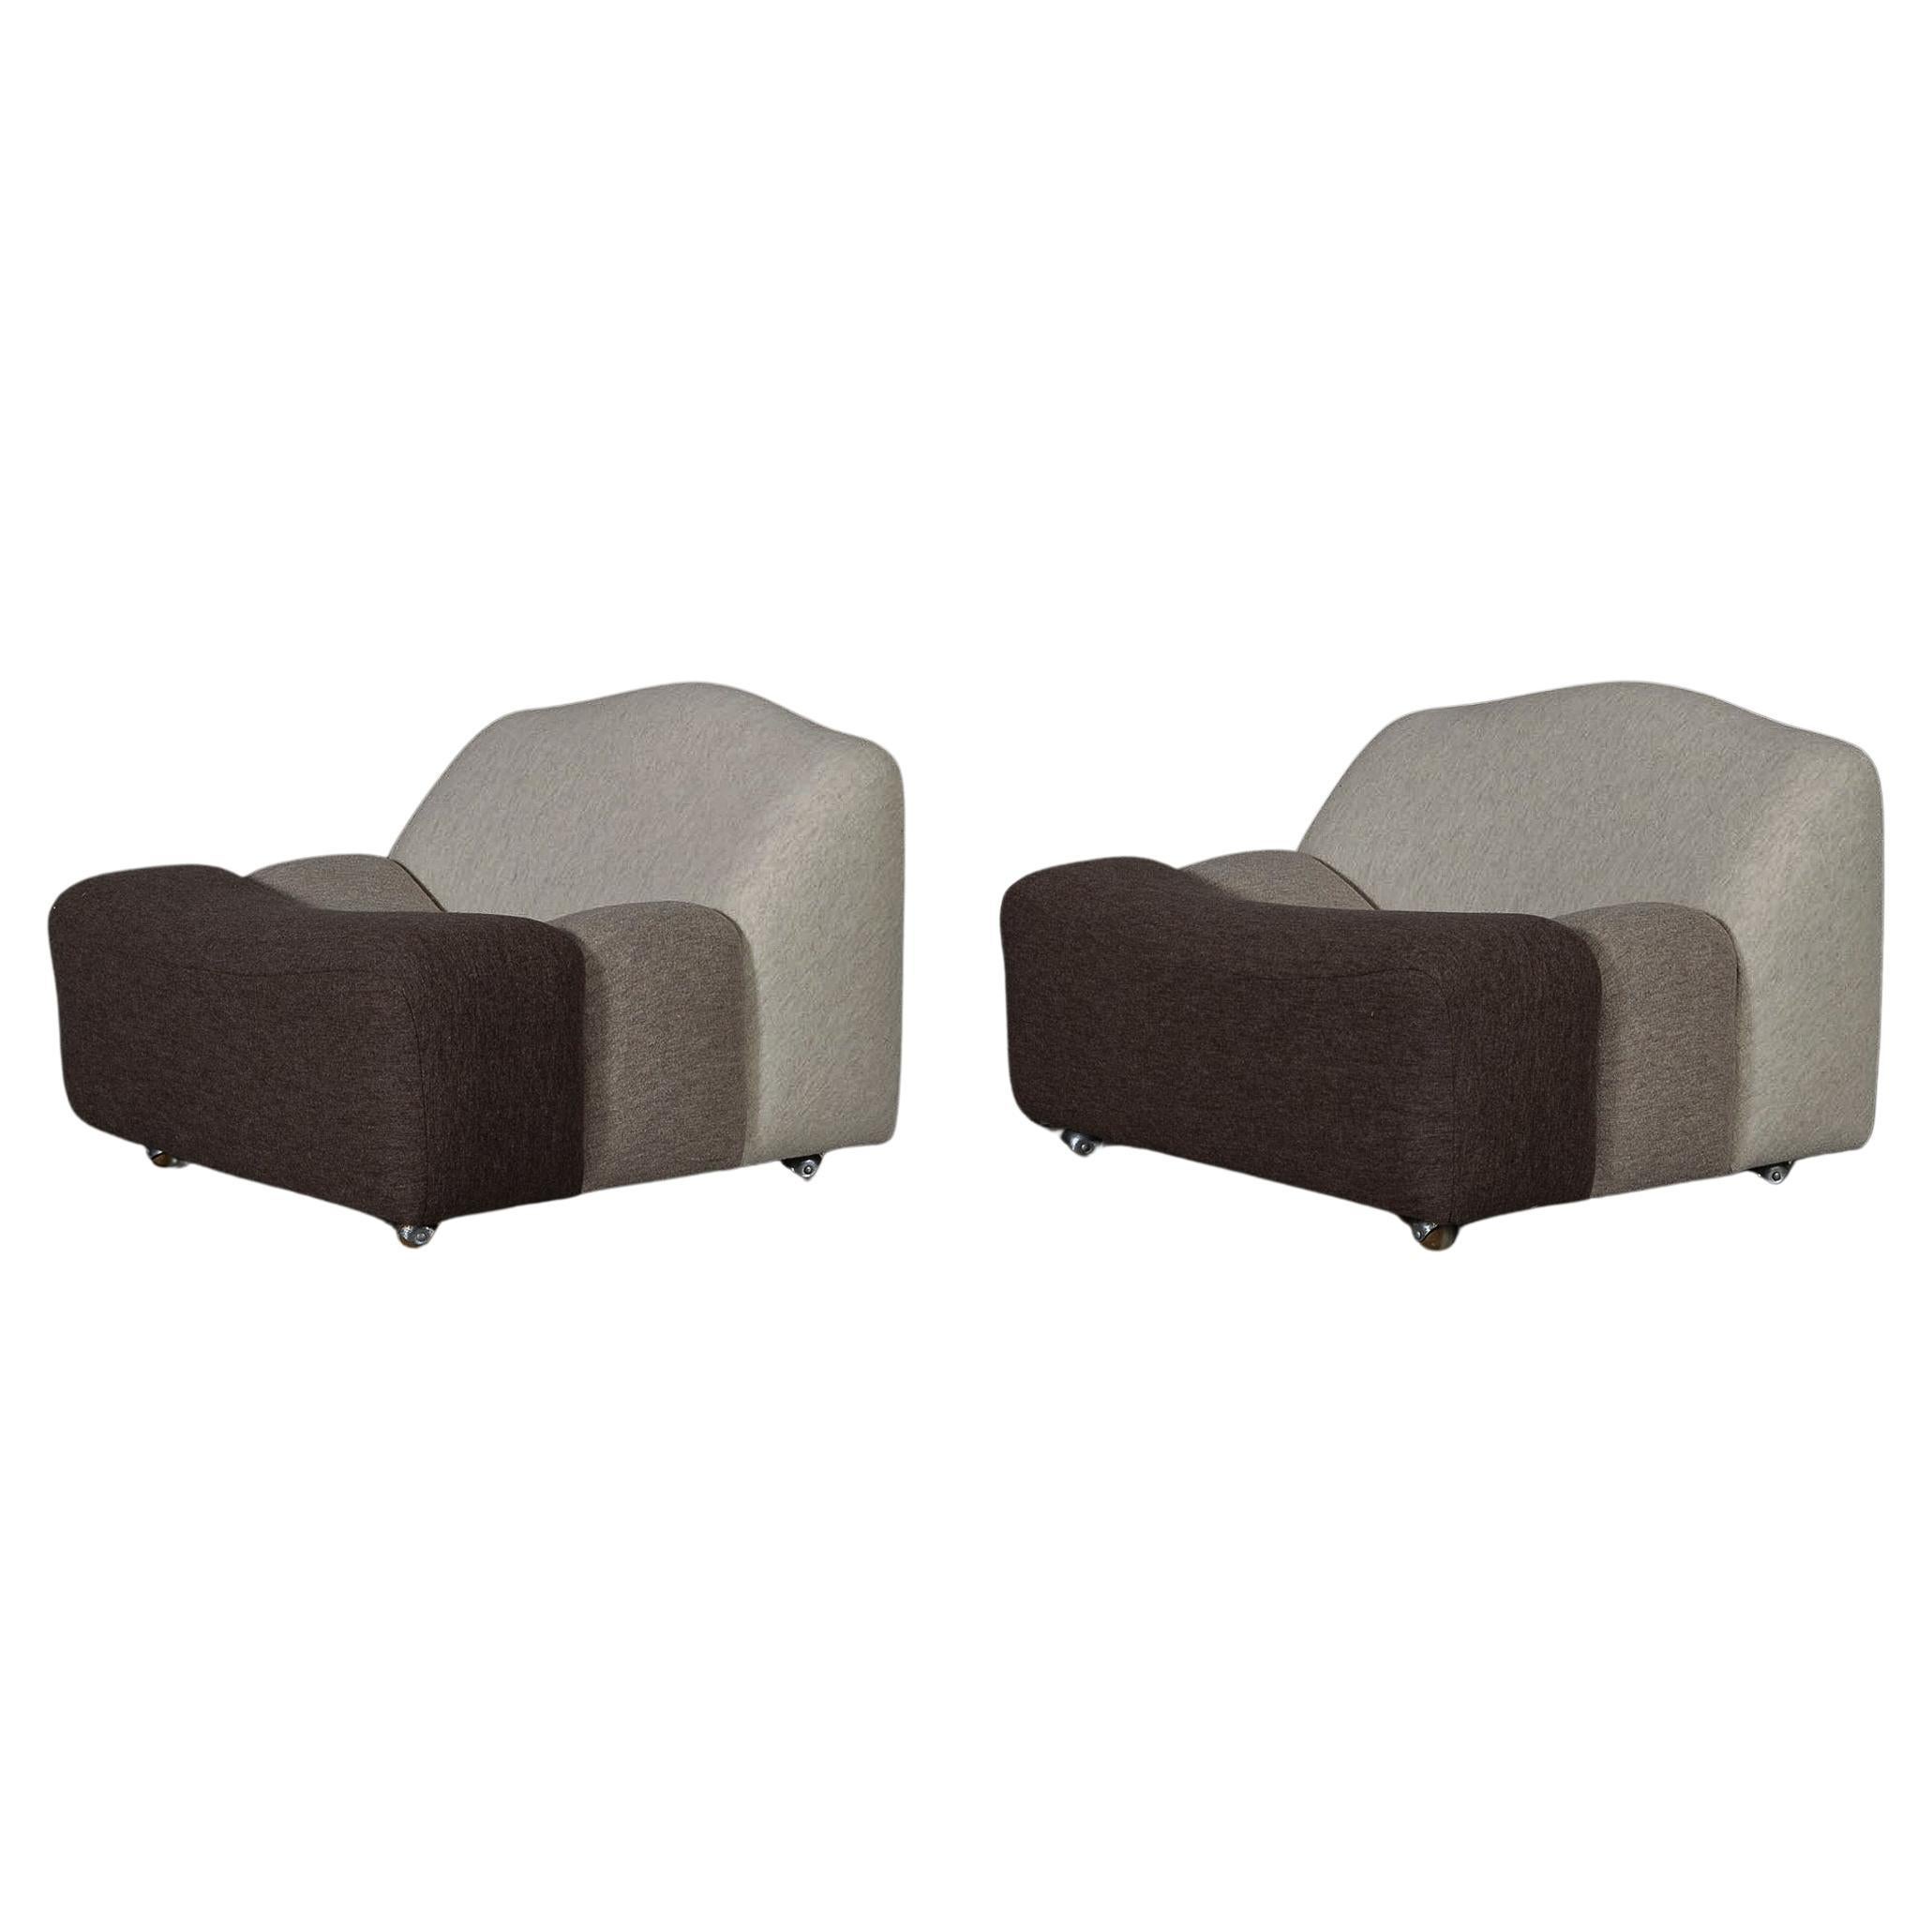 Pair of ABCD armchairs by Pierre Paulin